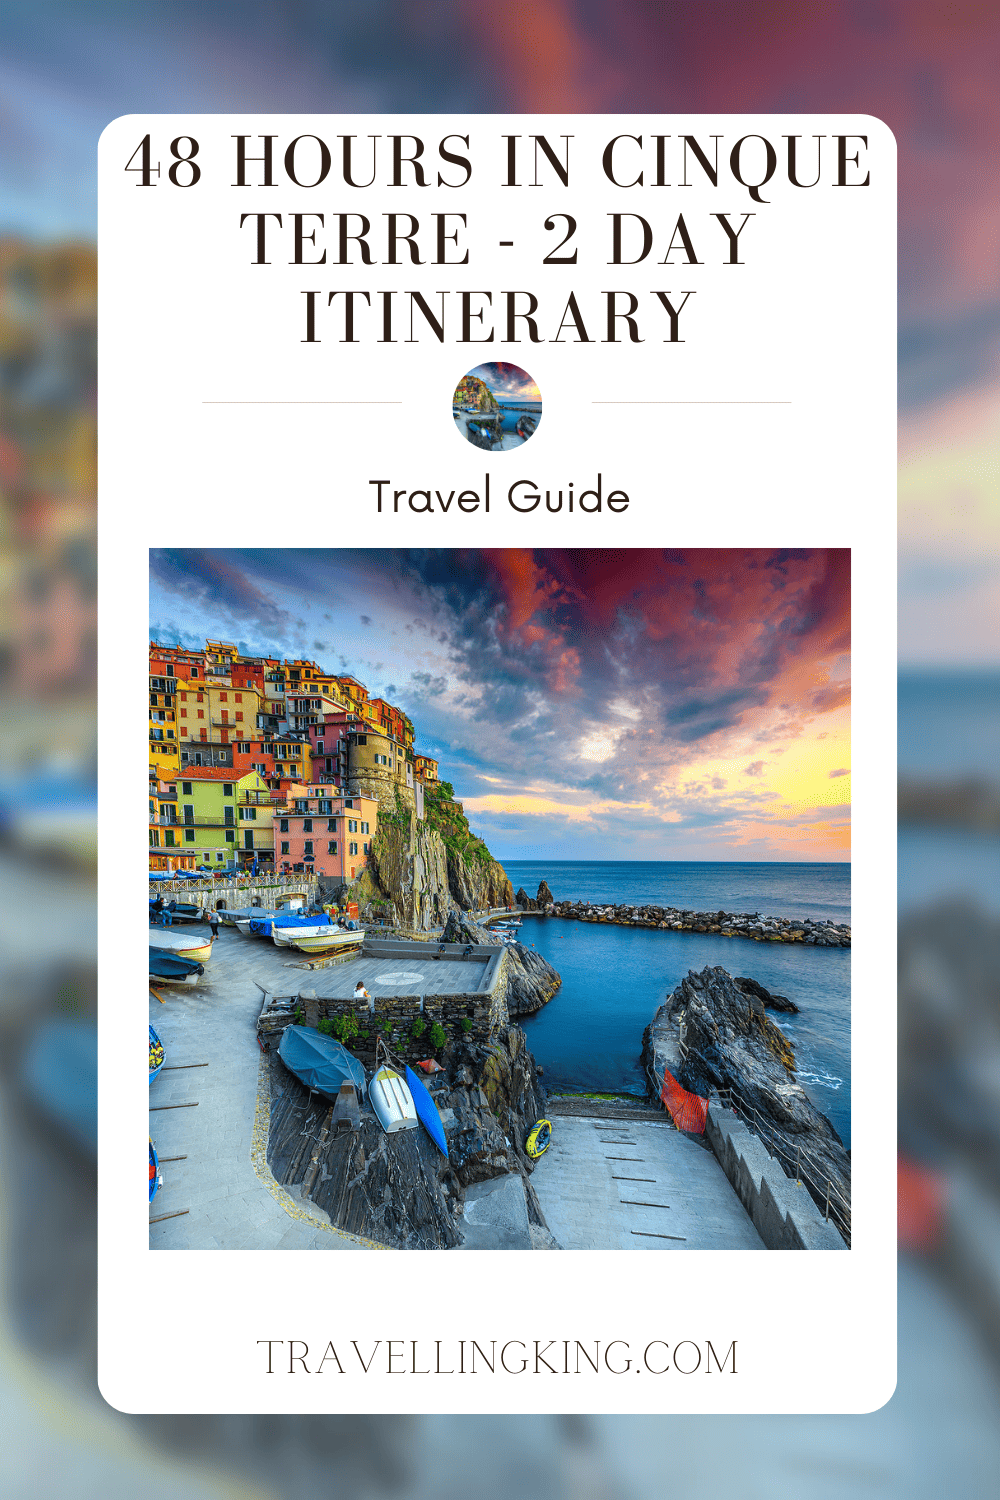 48 Hours in Cinque Terre - 2 Day Itinerary